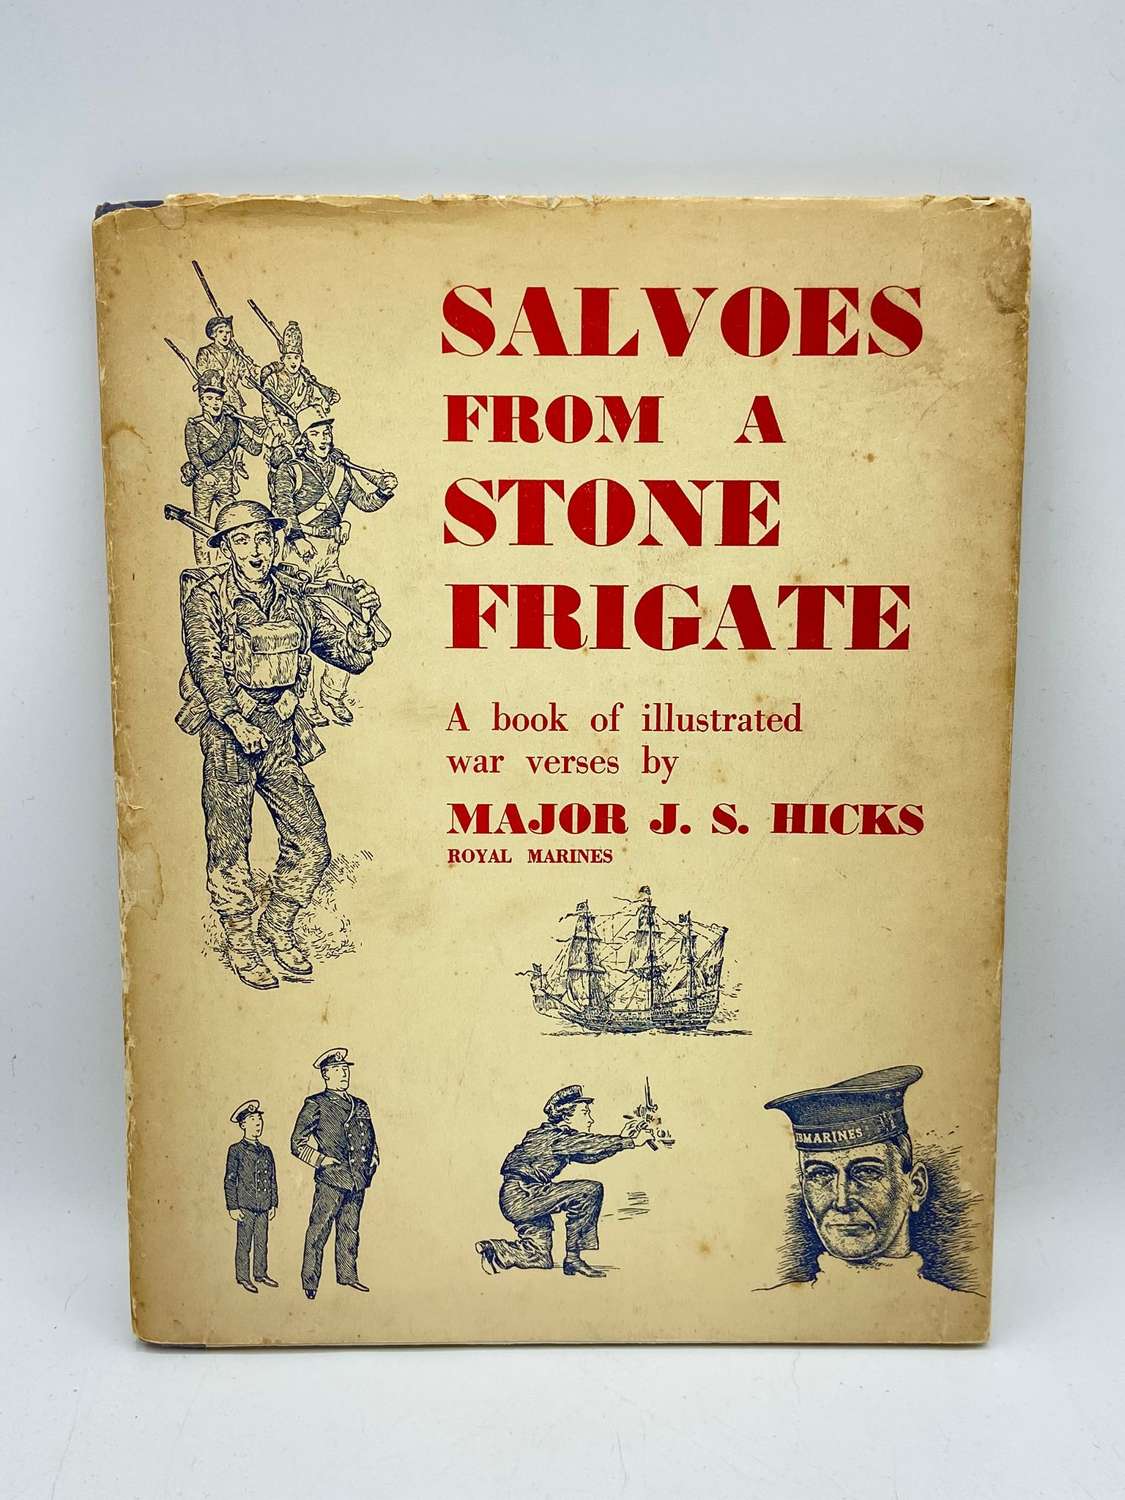 WW2 Salvoes From A Stone Frigate, A Book Of Ilustrated War Verses